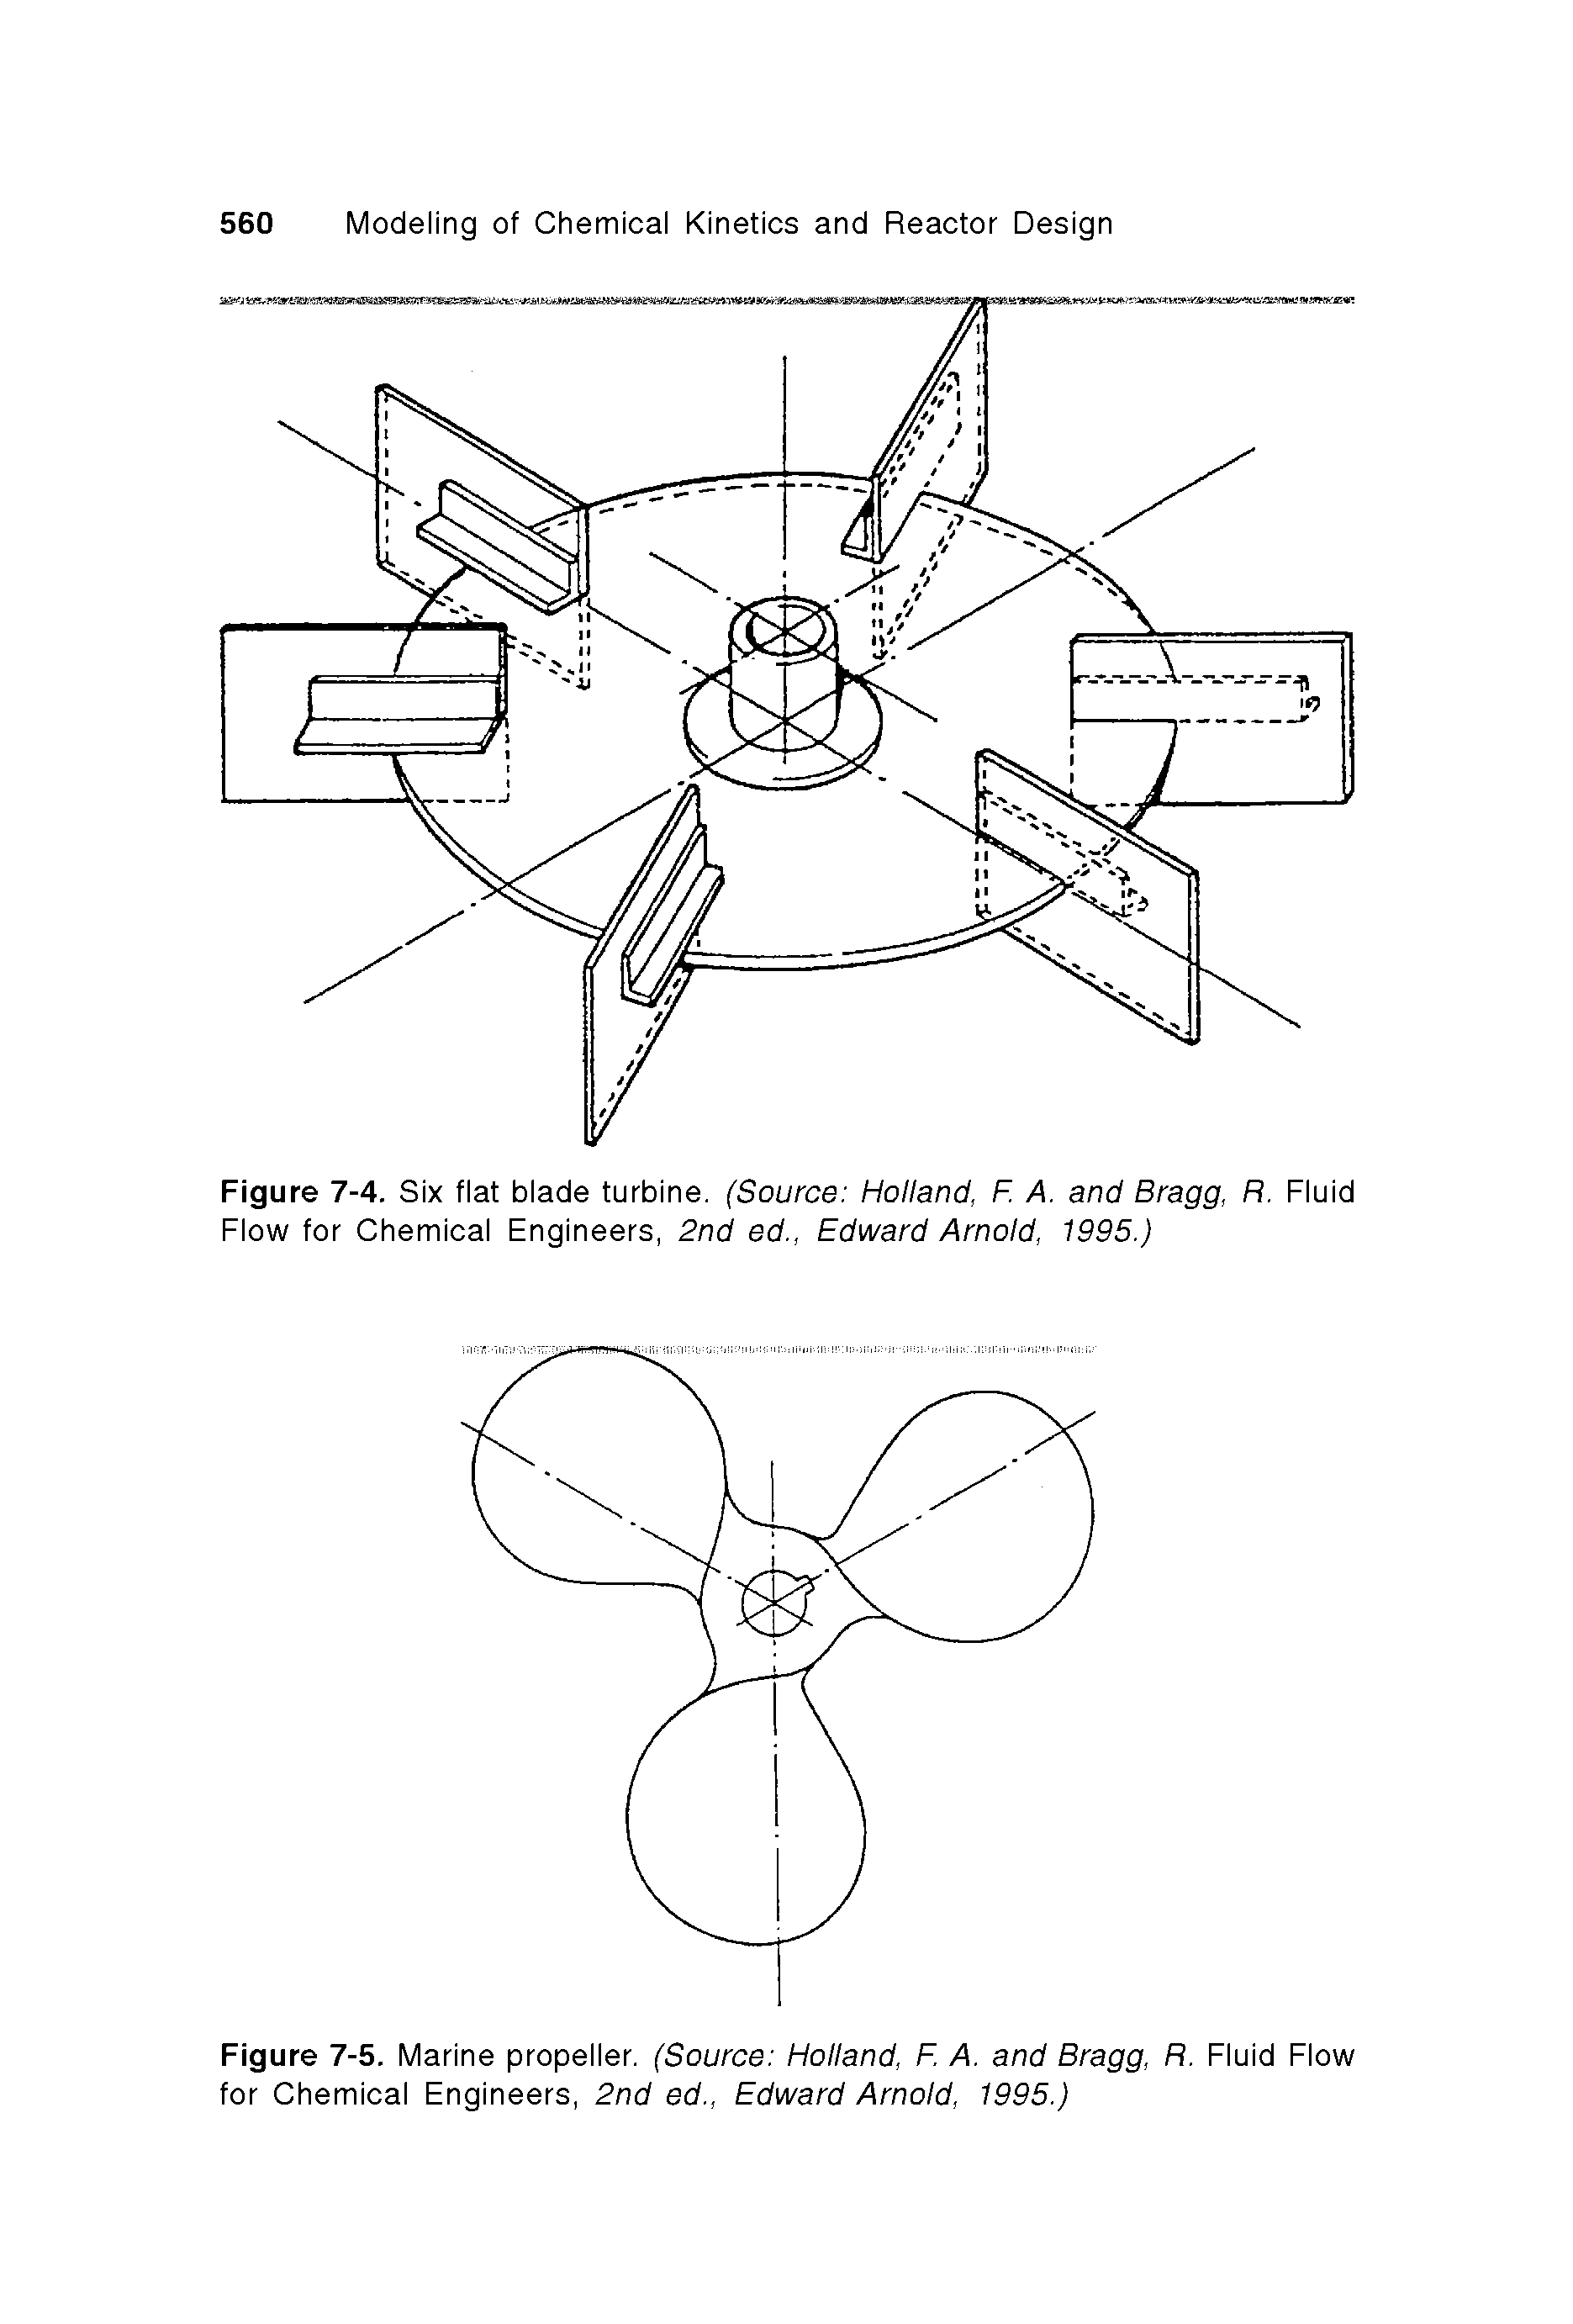 Figure 7-4. Six flat blade turbine. (Source Holland, F. A. and Bragg, R. Fluid Flow for Chemioal Engineers, 2nd ed., Edward Arnold, 1995.)...